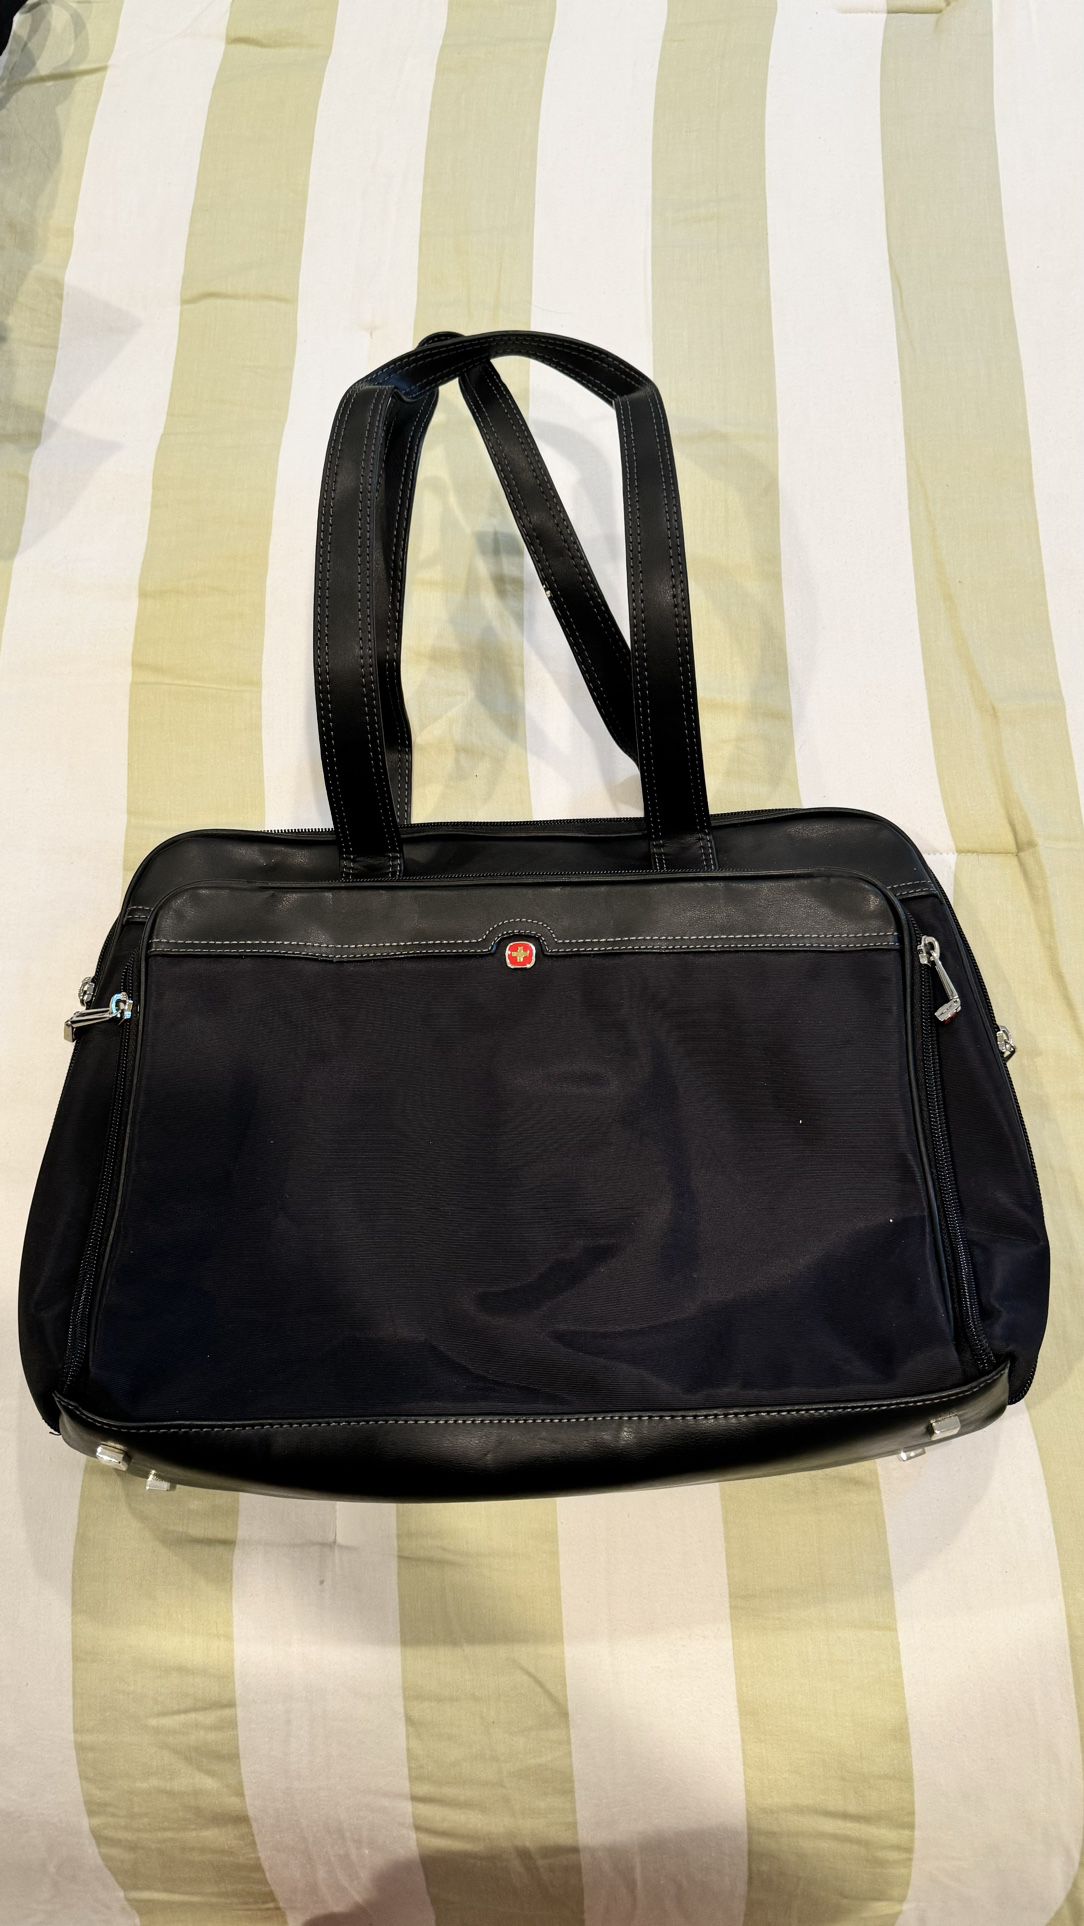 Swiss gear Laptop Bag Tote With Several Dividers